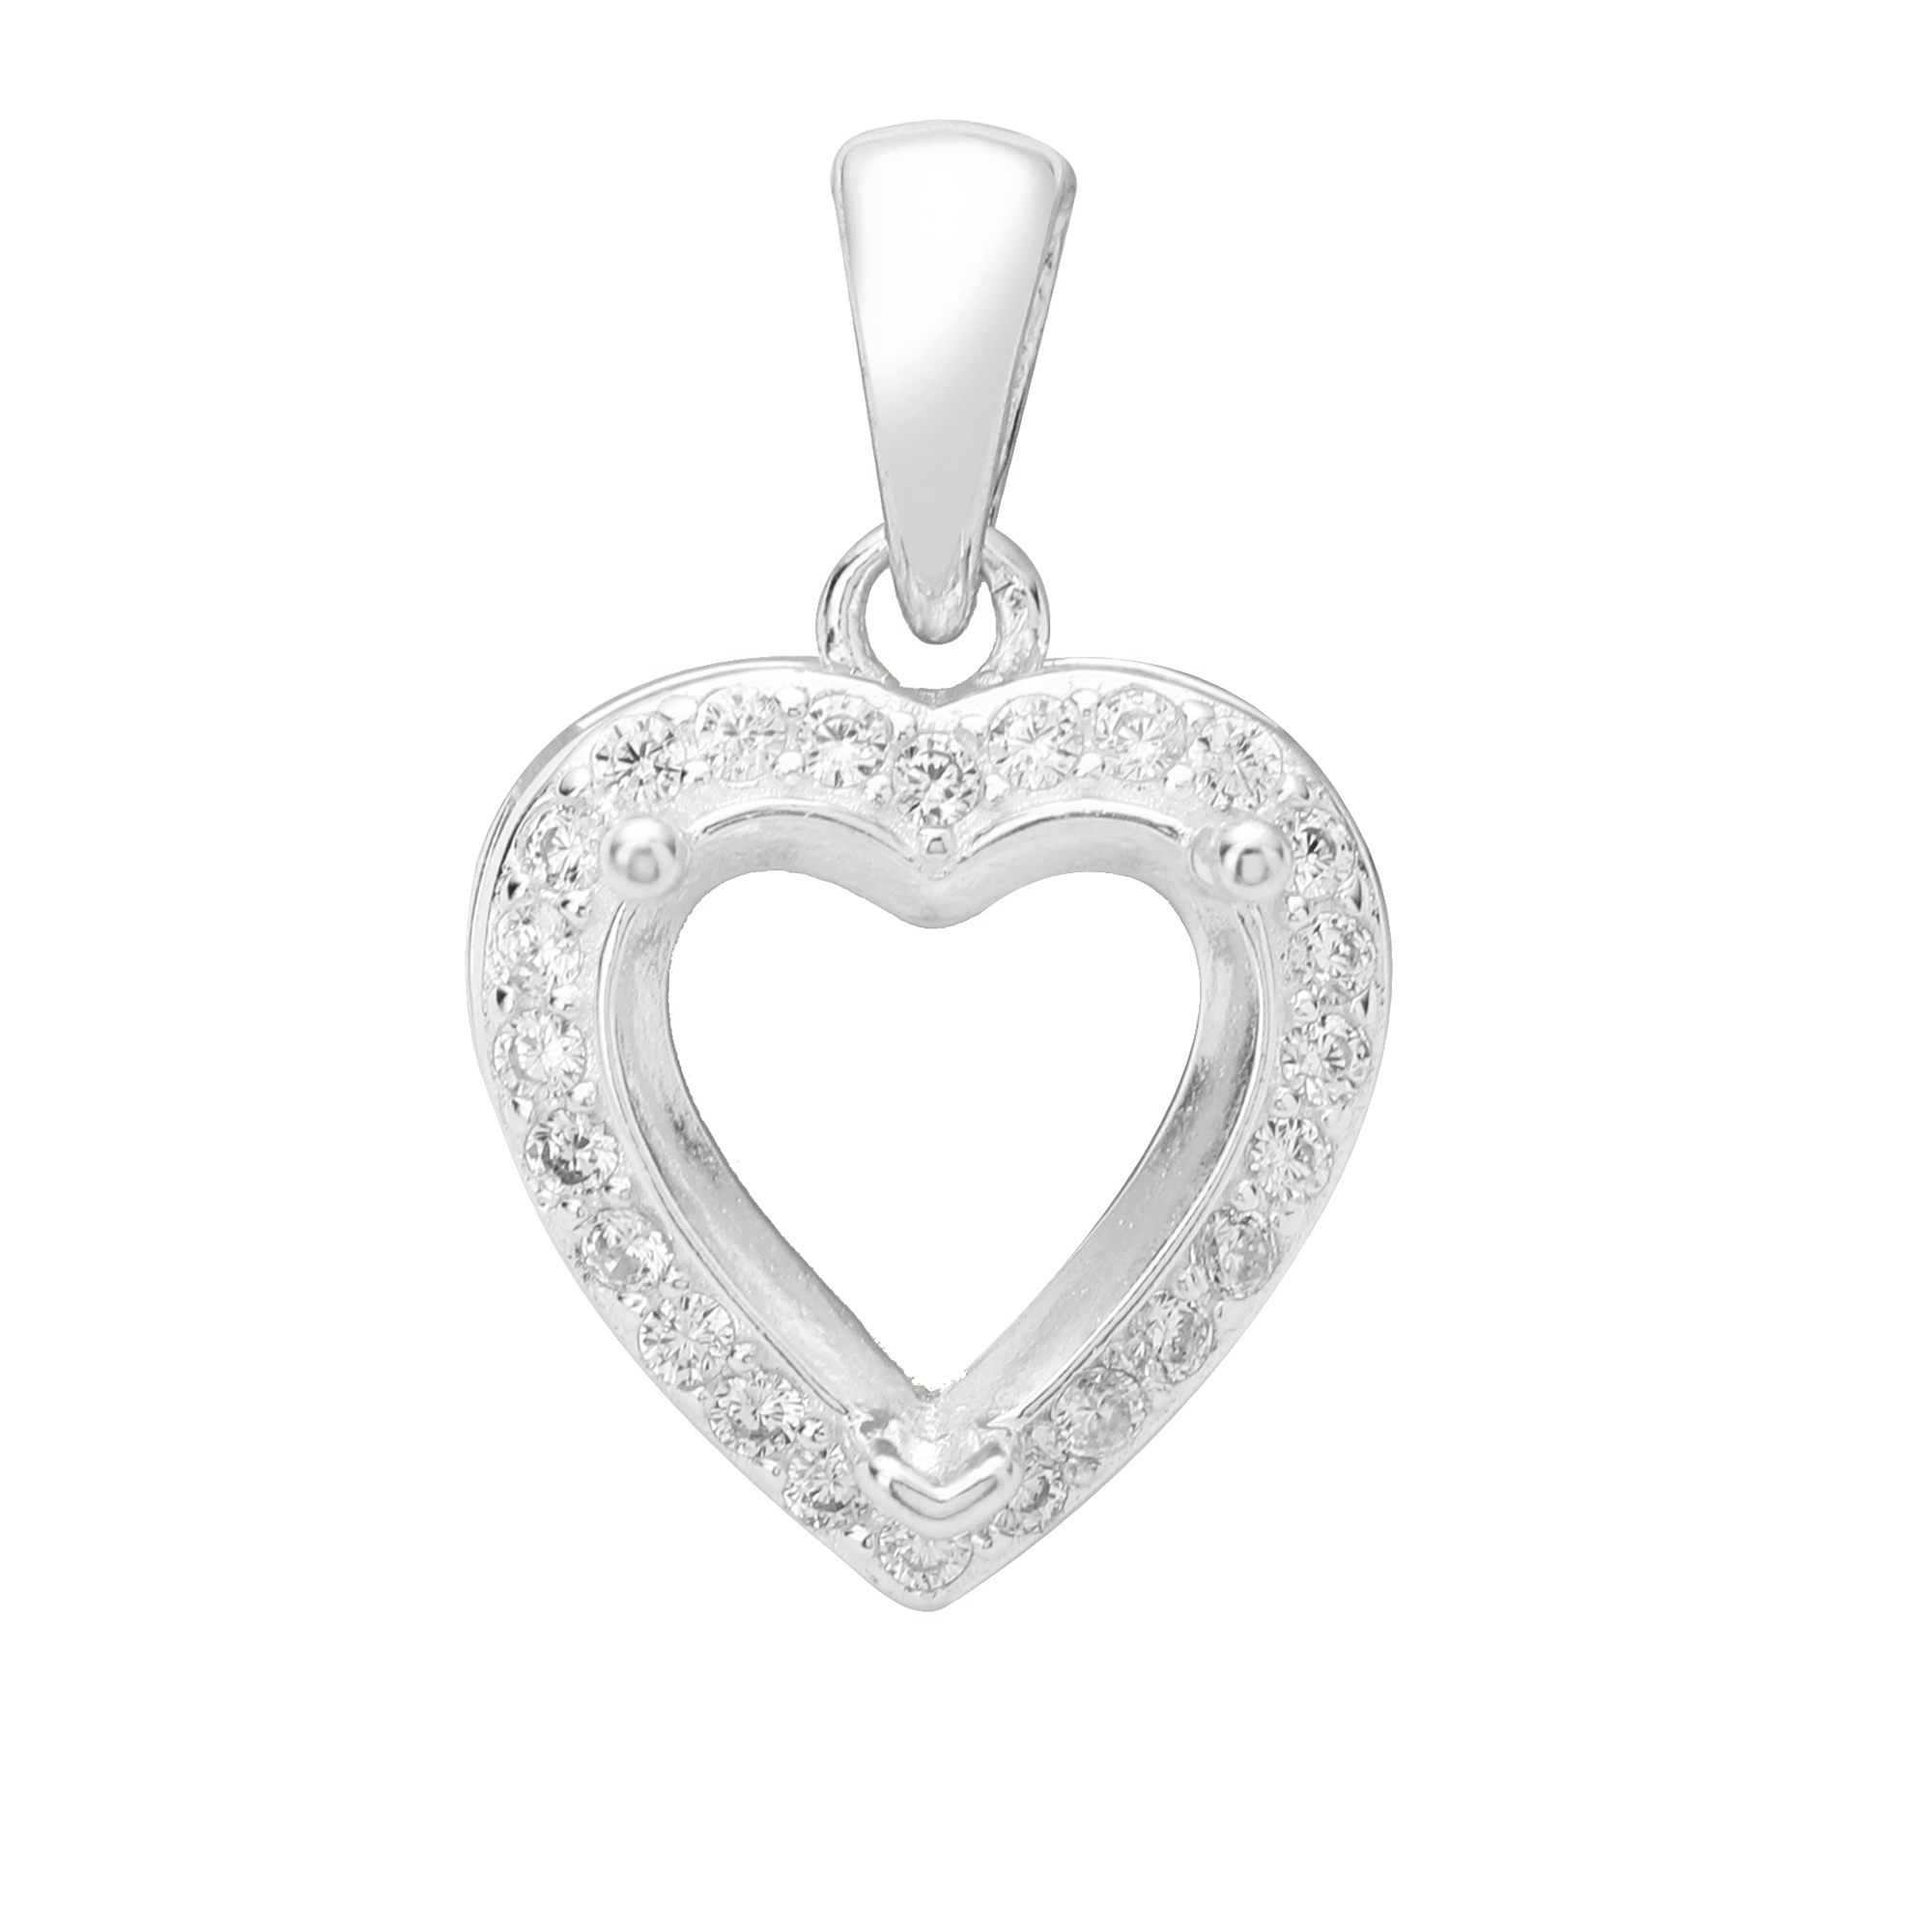 8MM Halo Heart Prong Pendant Settings,Solid 925 Sterling Silver Rose Gold Plated Charm,Pave CZ Stone Heart Charm,DIY Pendant Bezel For Gemstone 1431203 - Click Image to Close